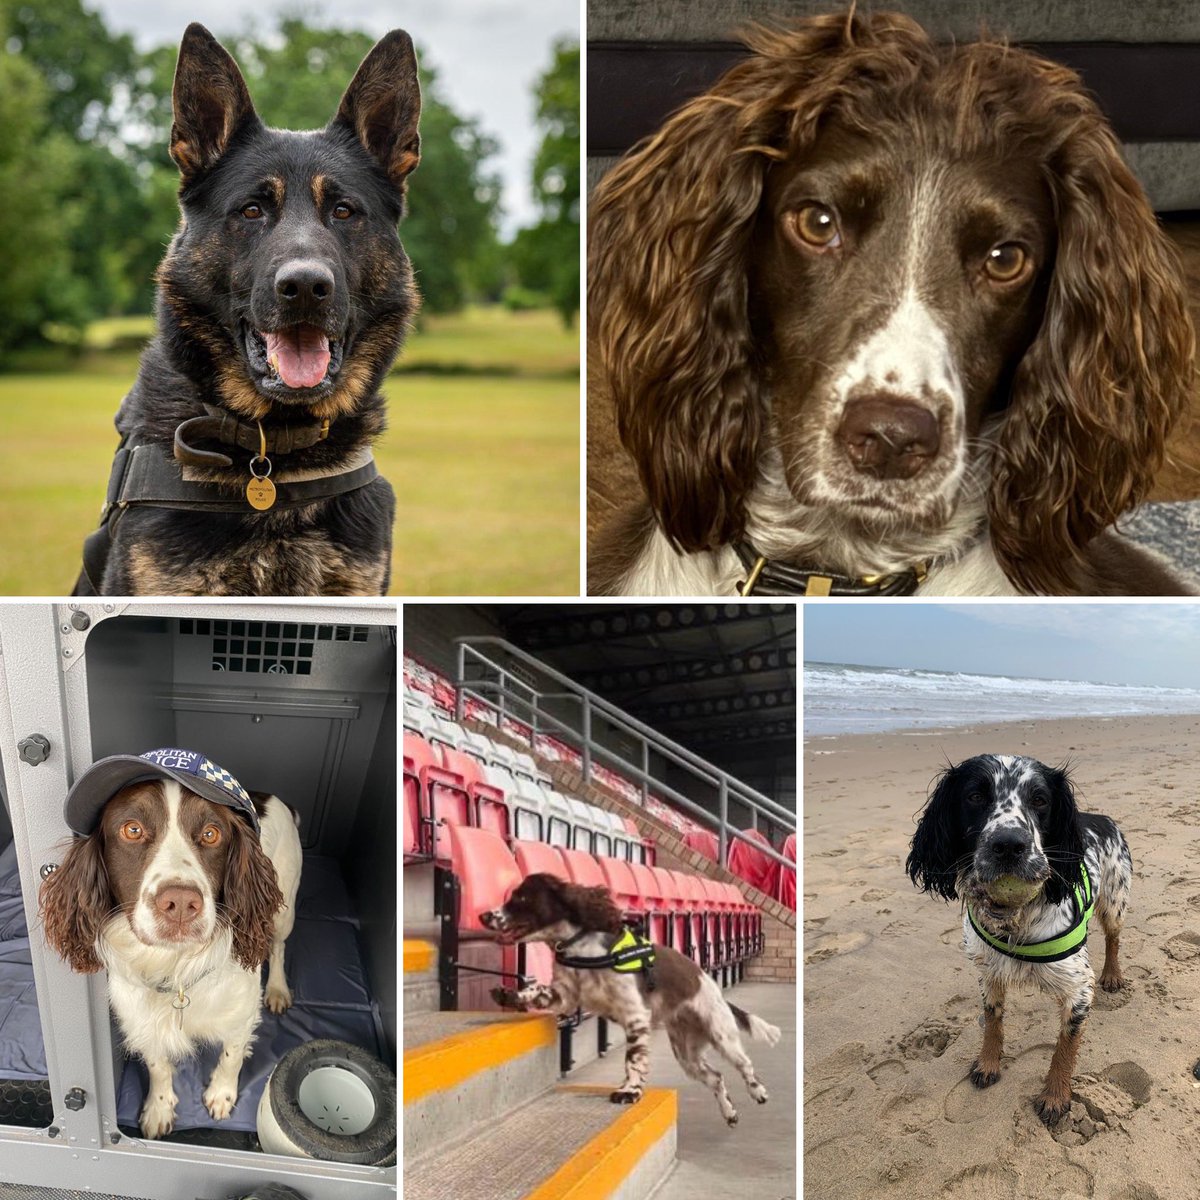 Next Sunday, 10th March, colleagues from the @MetTaskforce explosives dog section will 🏃‍♀️ the Victoria Park 10k in London to help raise funds for @lrpduk 🙌🏻 If you can spare a few pounds, please consider sponsoring them🙏🏻 justgiving.com/page/aa1709032… 🐶🐾💙